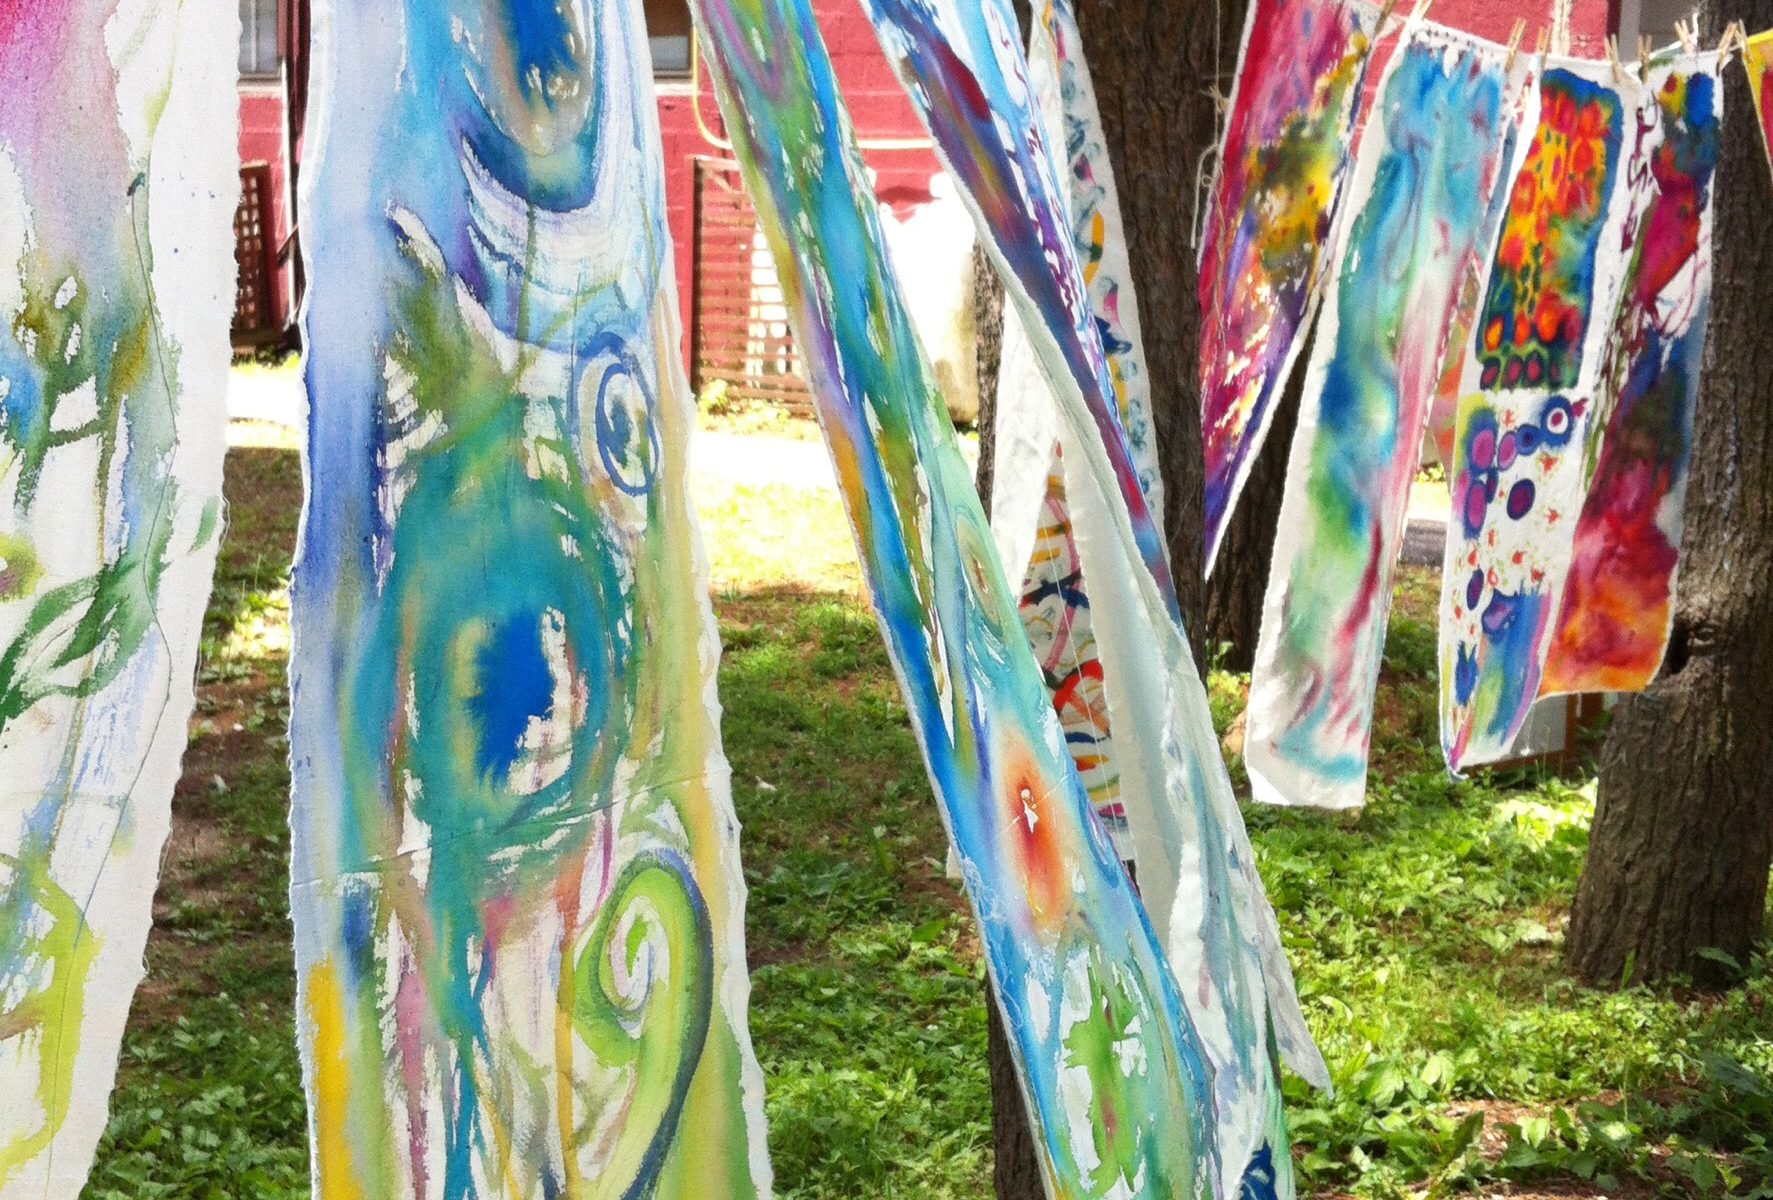 A line of colorful scarves hanging on a tree.